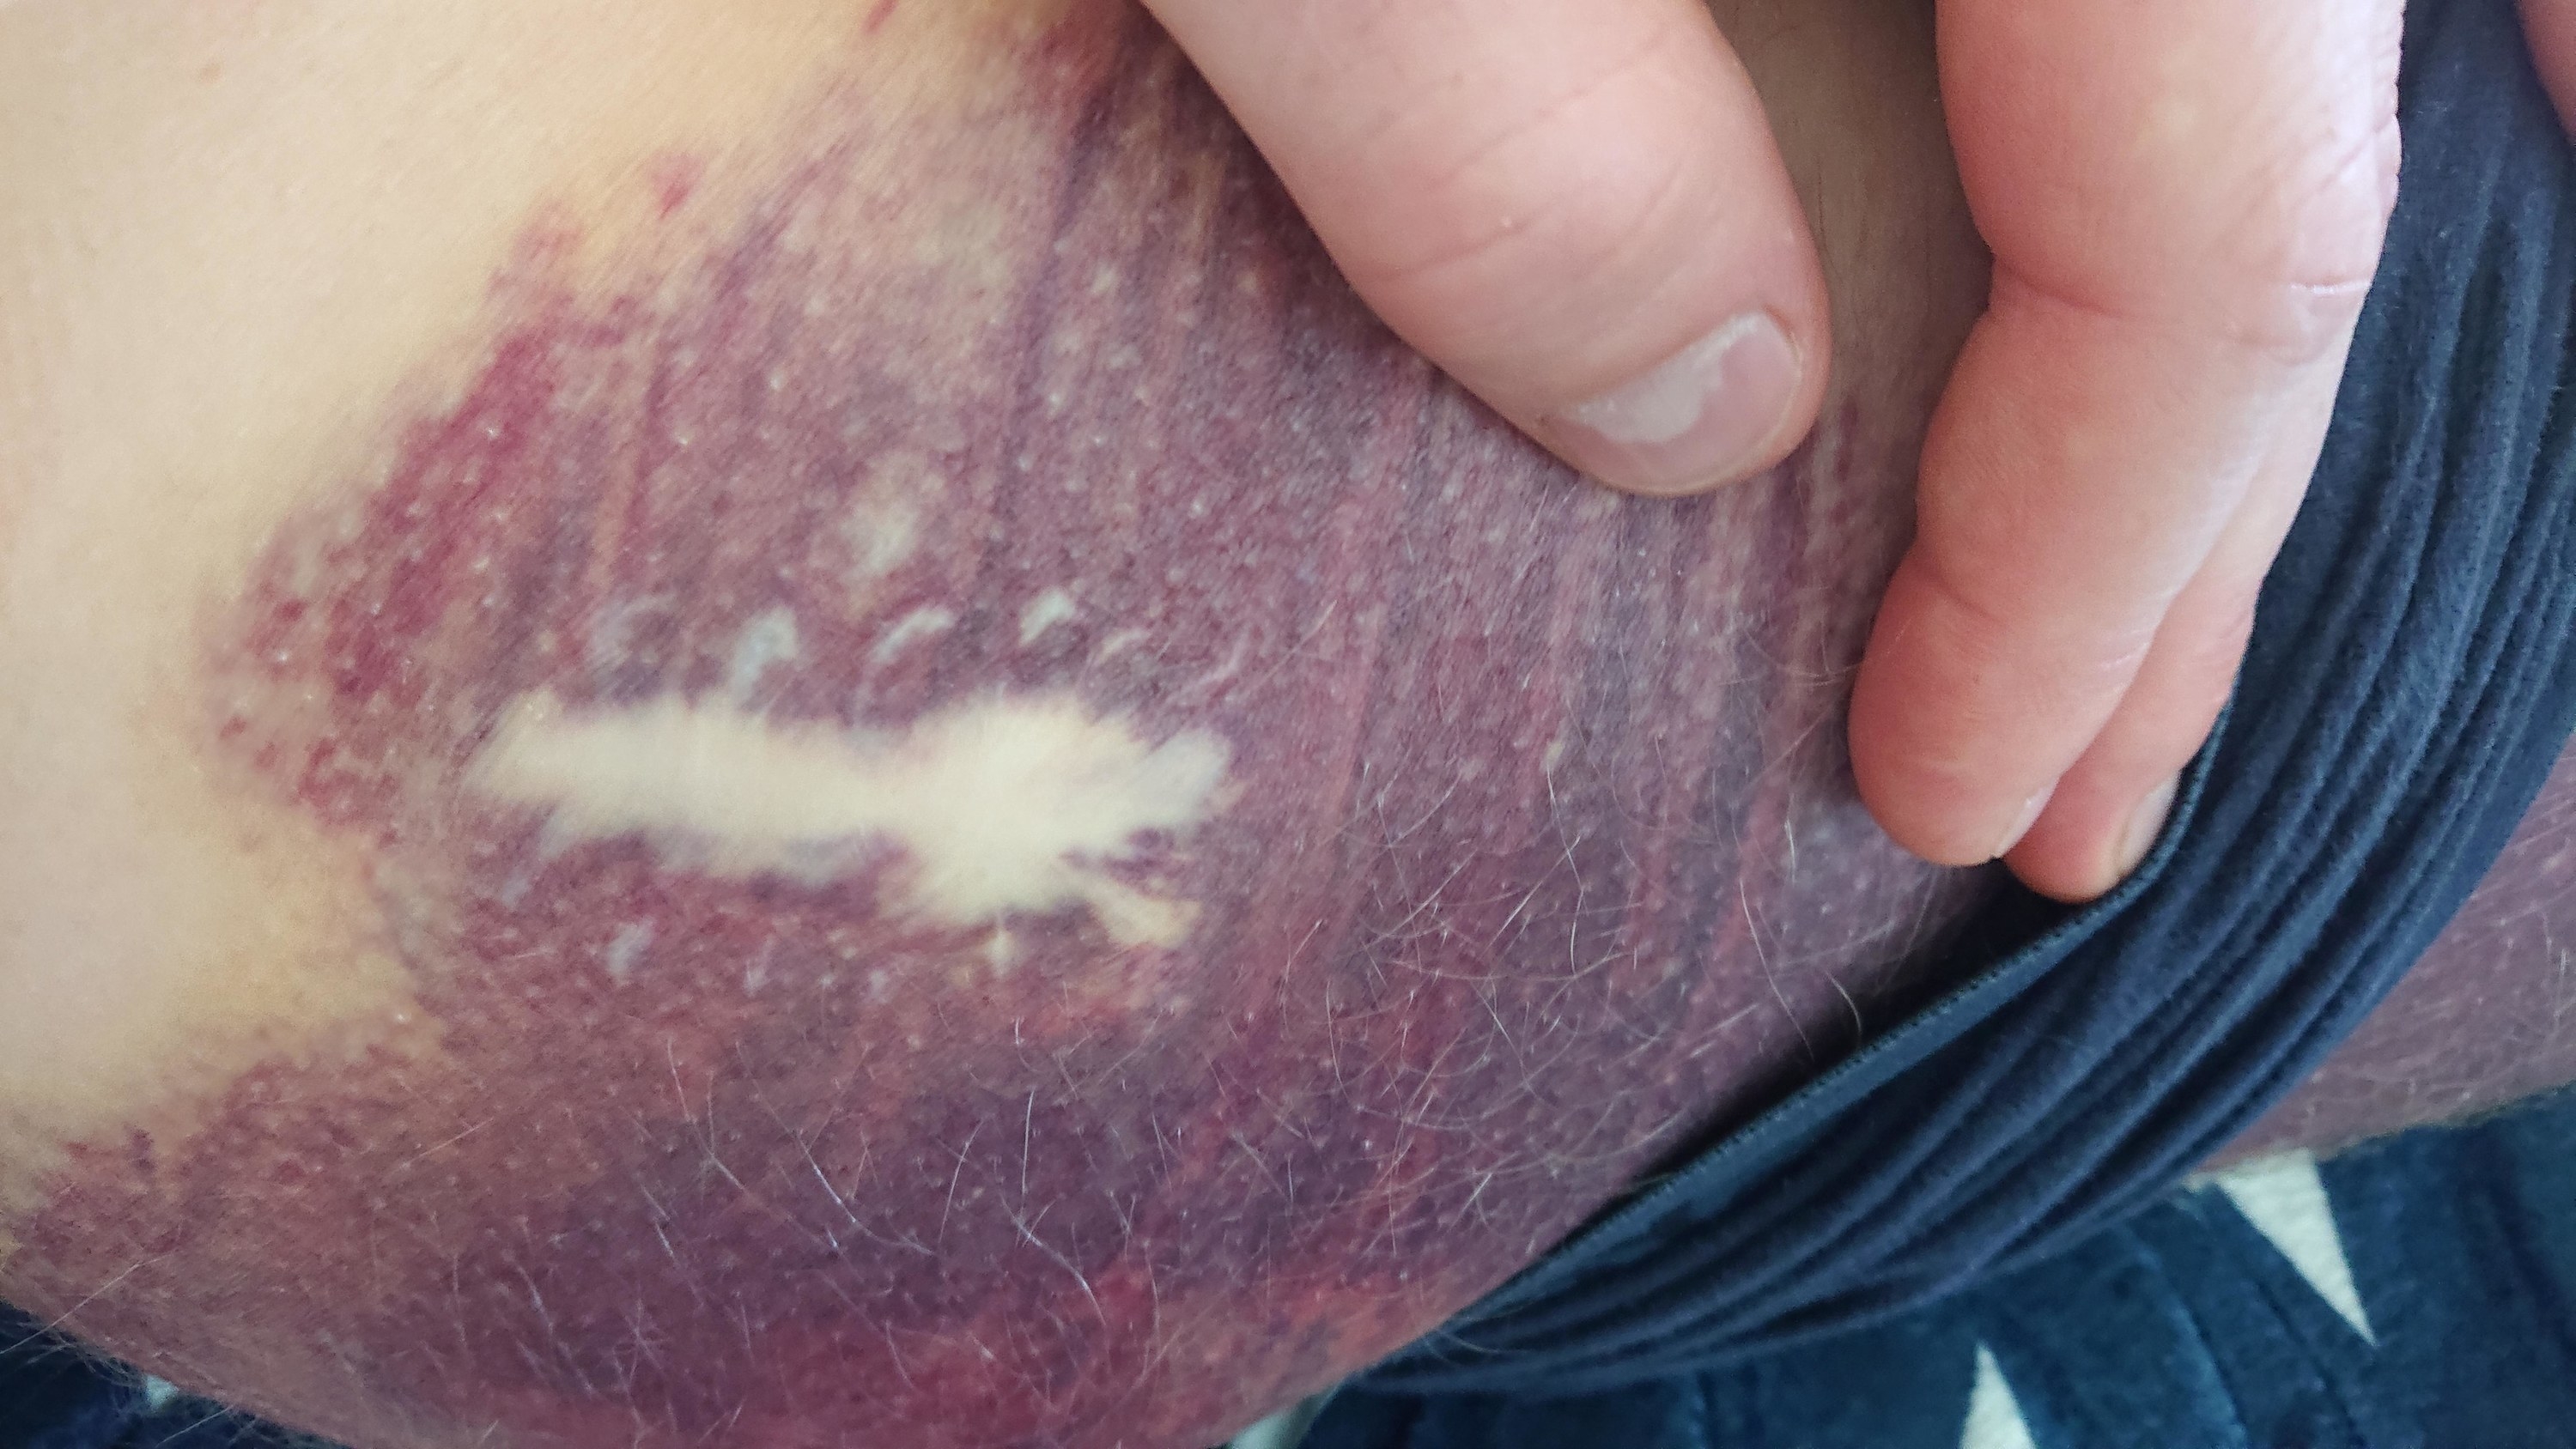 A large purplish bruise with an unbruised section